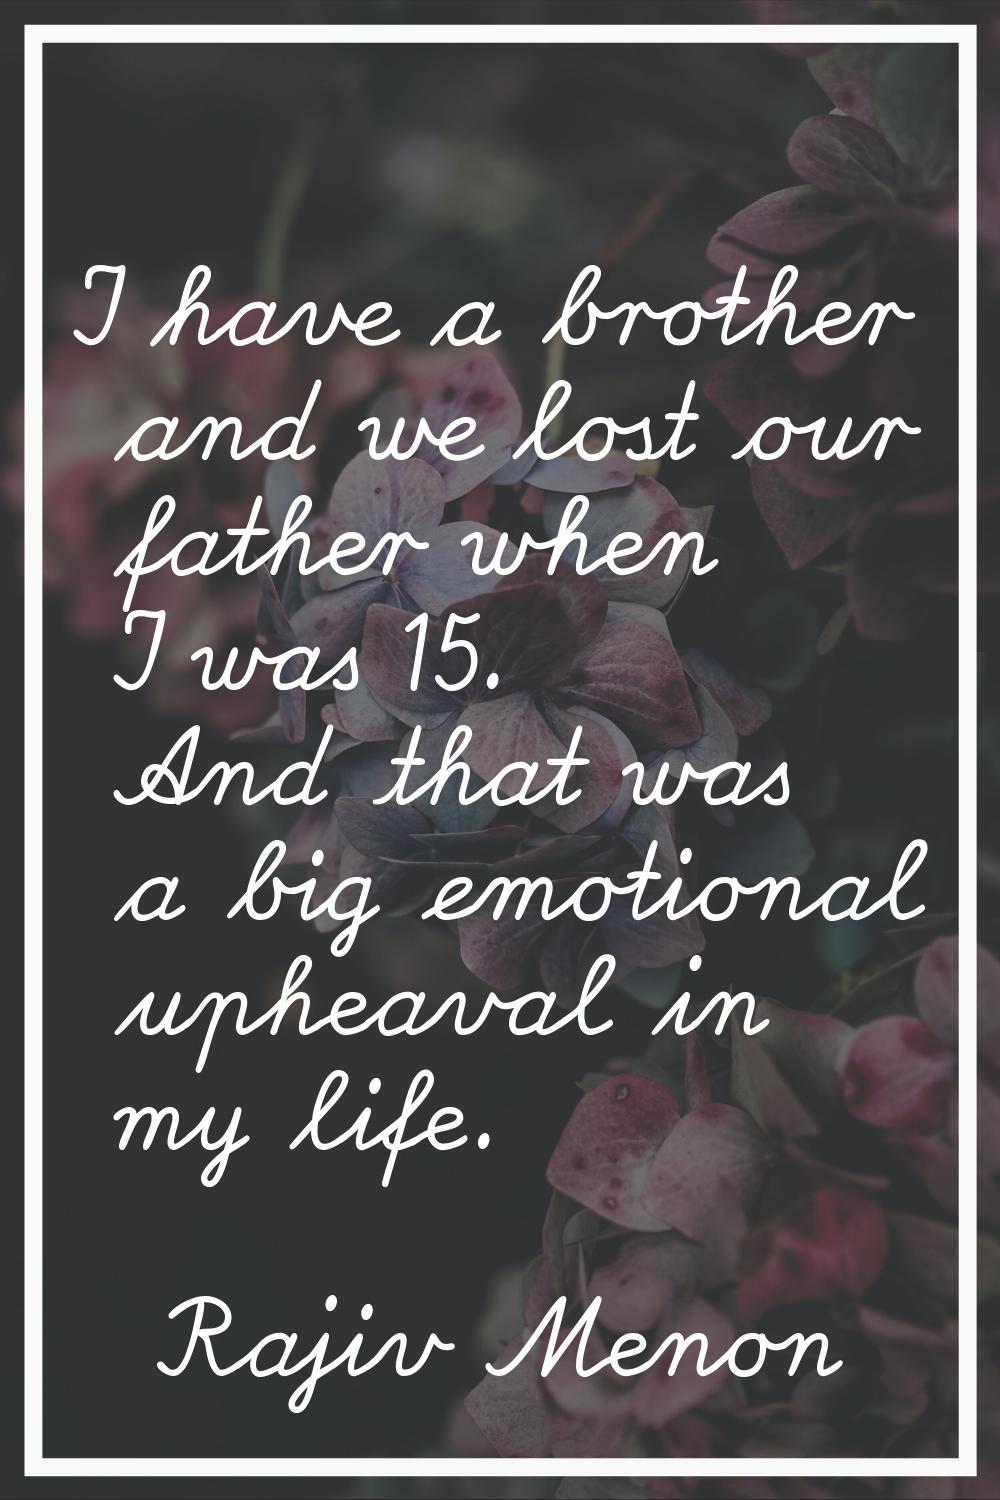 I have a brother and we lost our father when I was 15. And that was a big emotional upheaval in my 